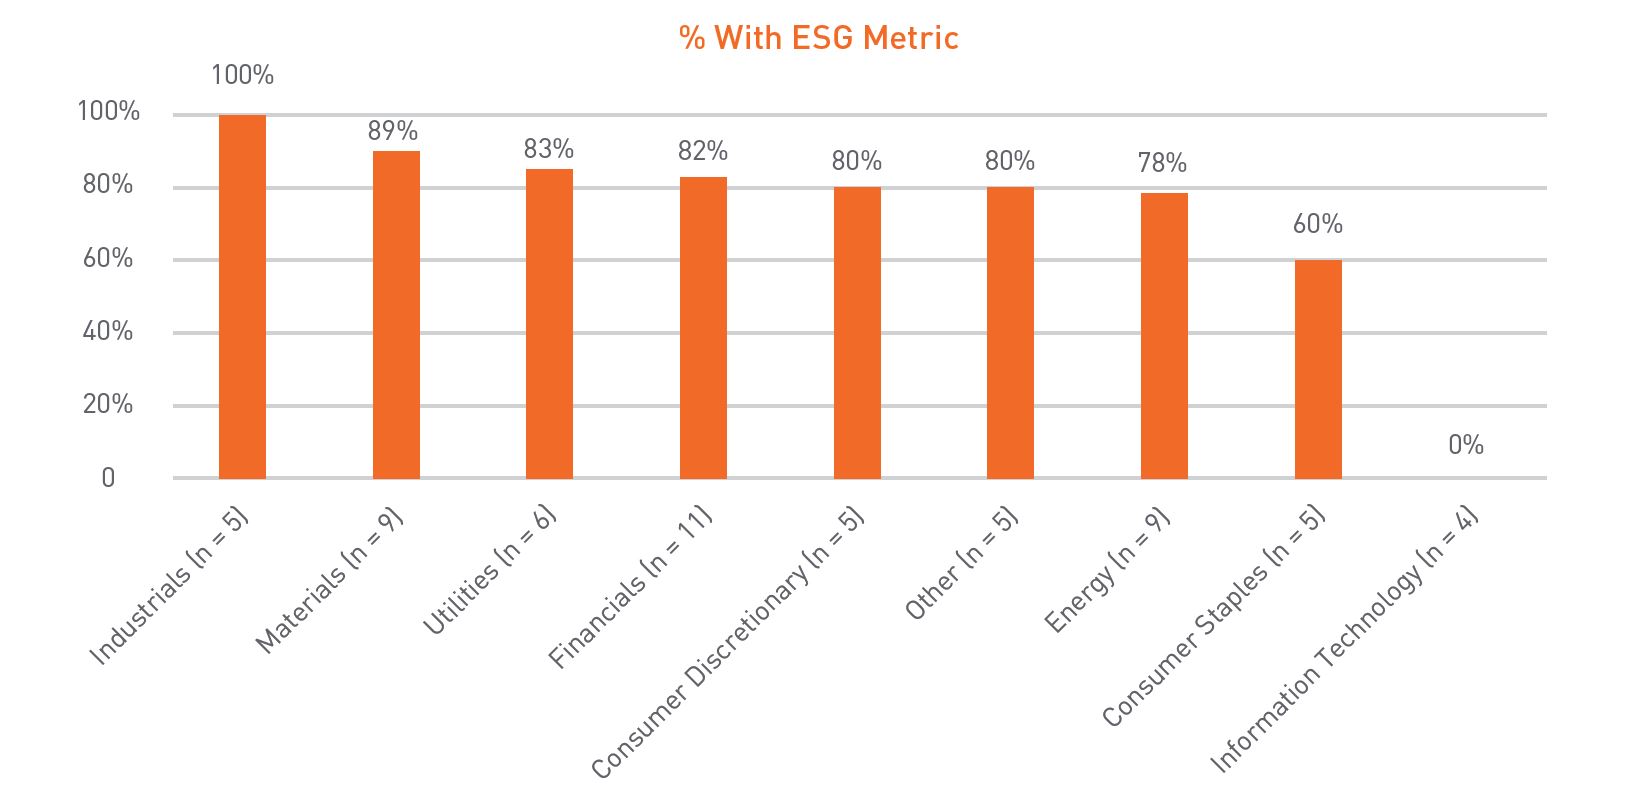 % With ESG Metric